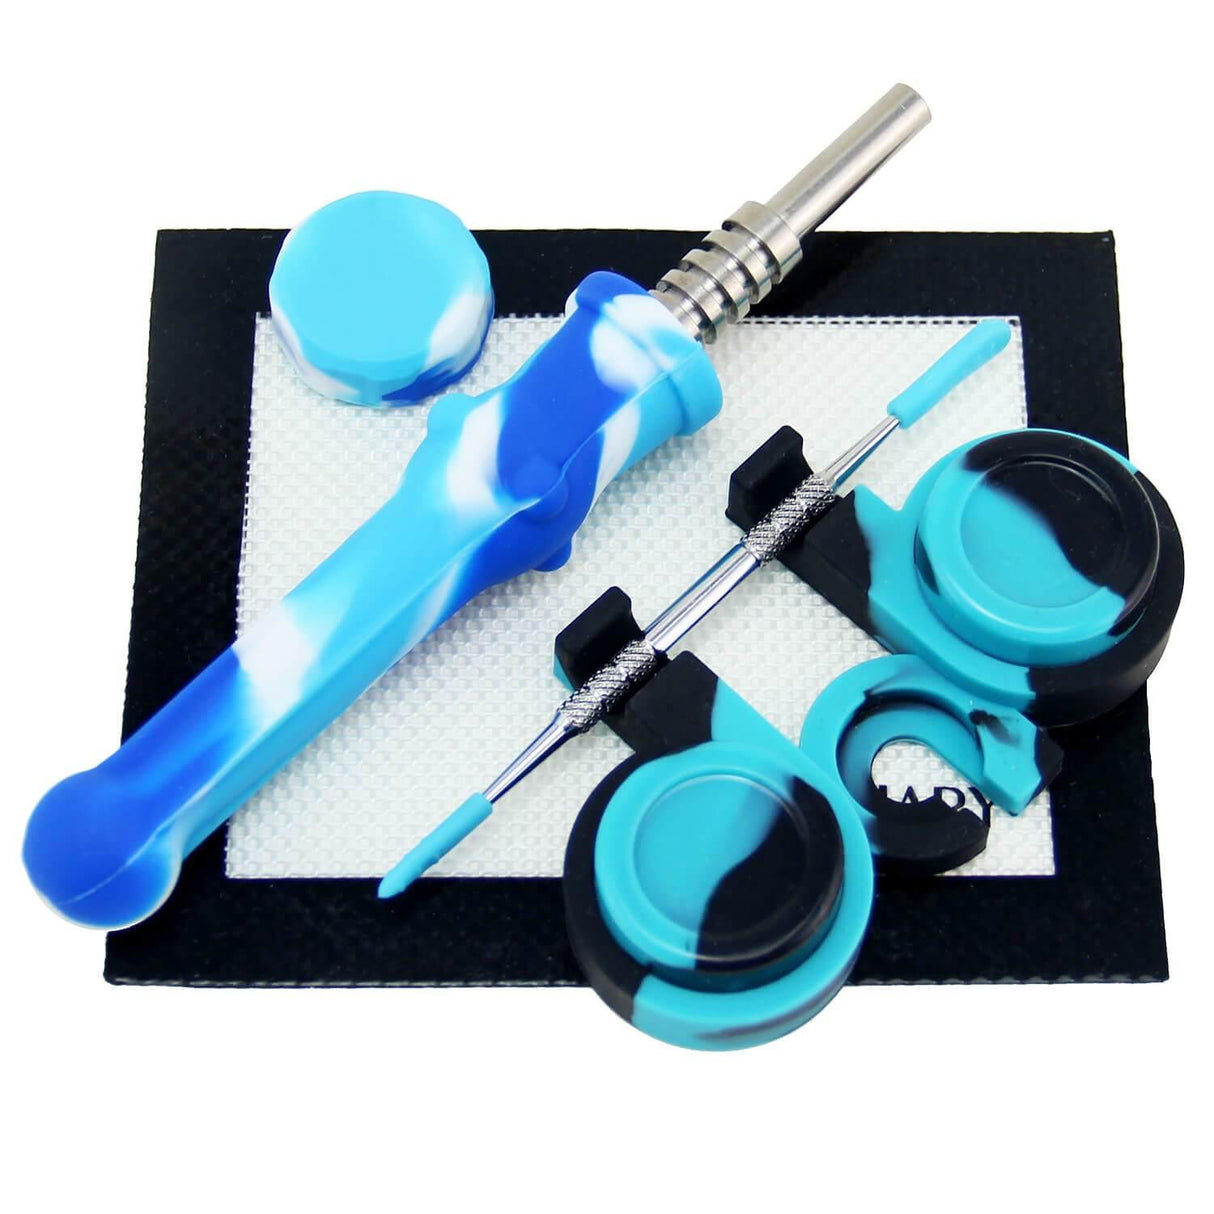 PILOT DIARY Silicone Nectar Collector Dab Kit in Blue - Top View with Accessories